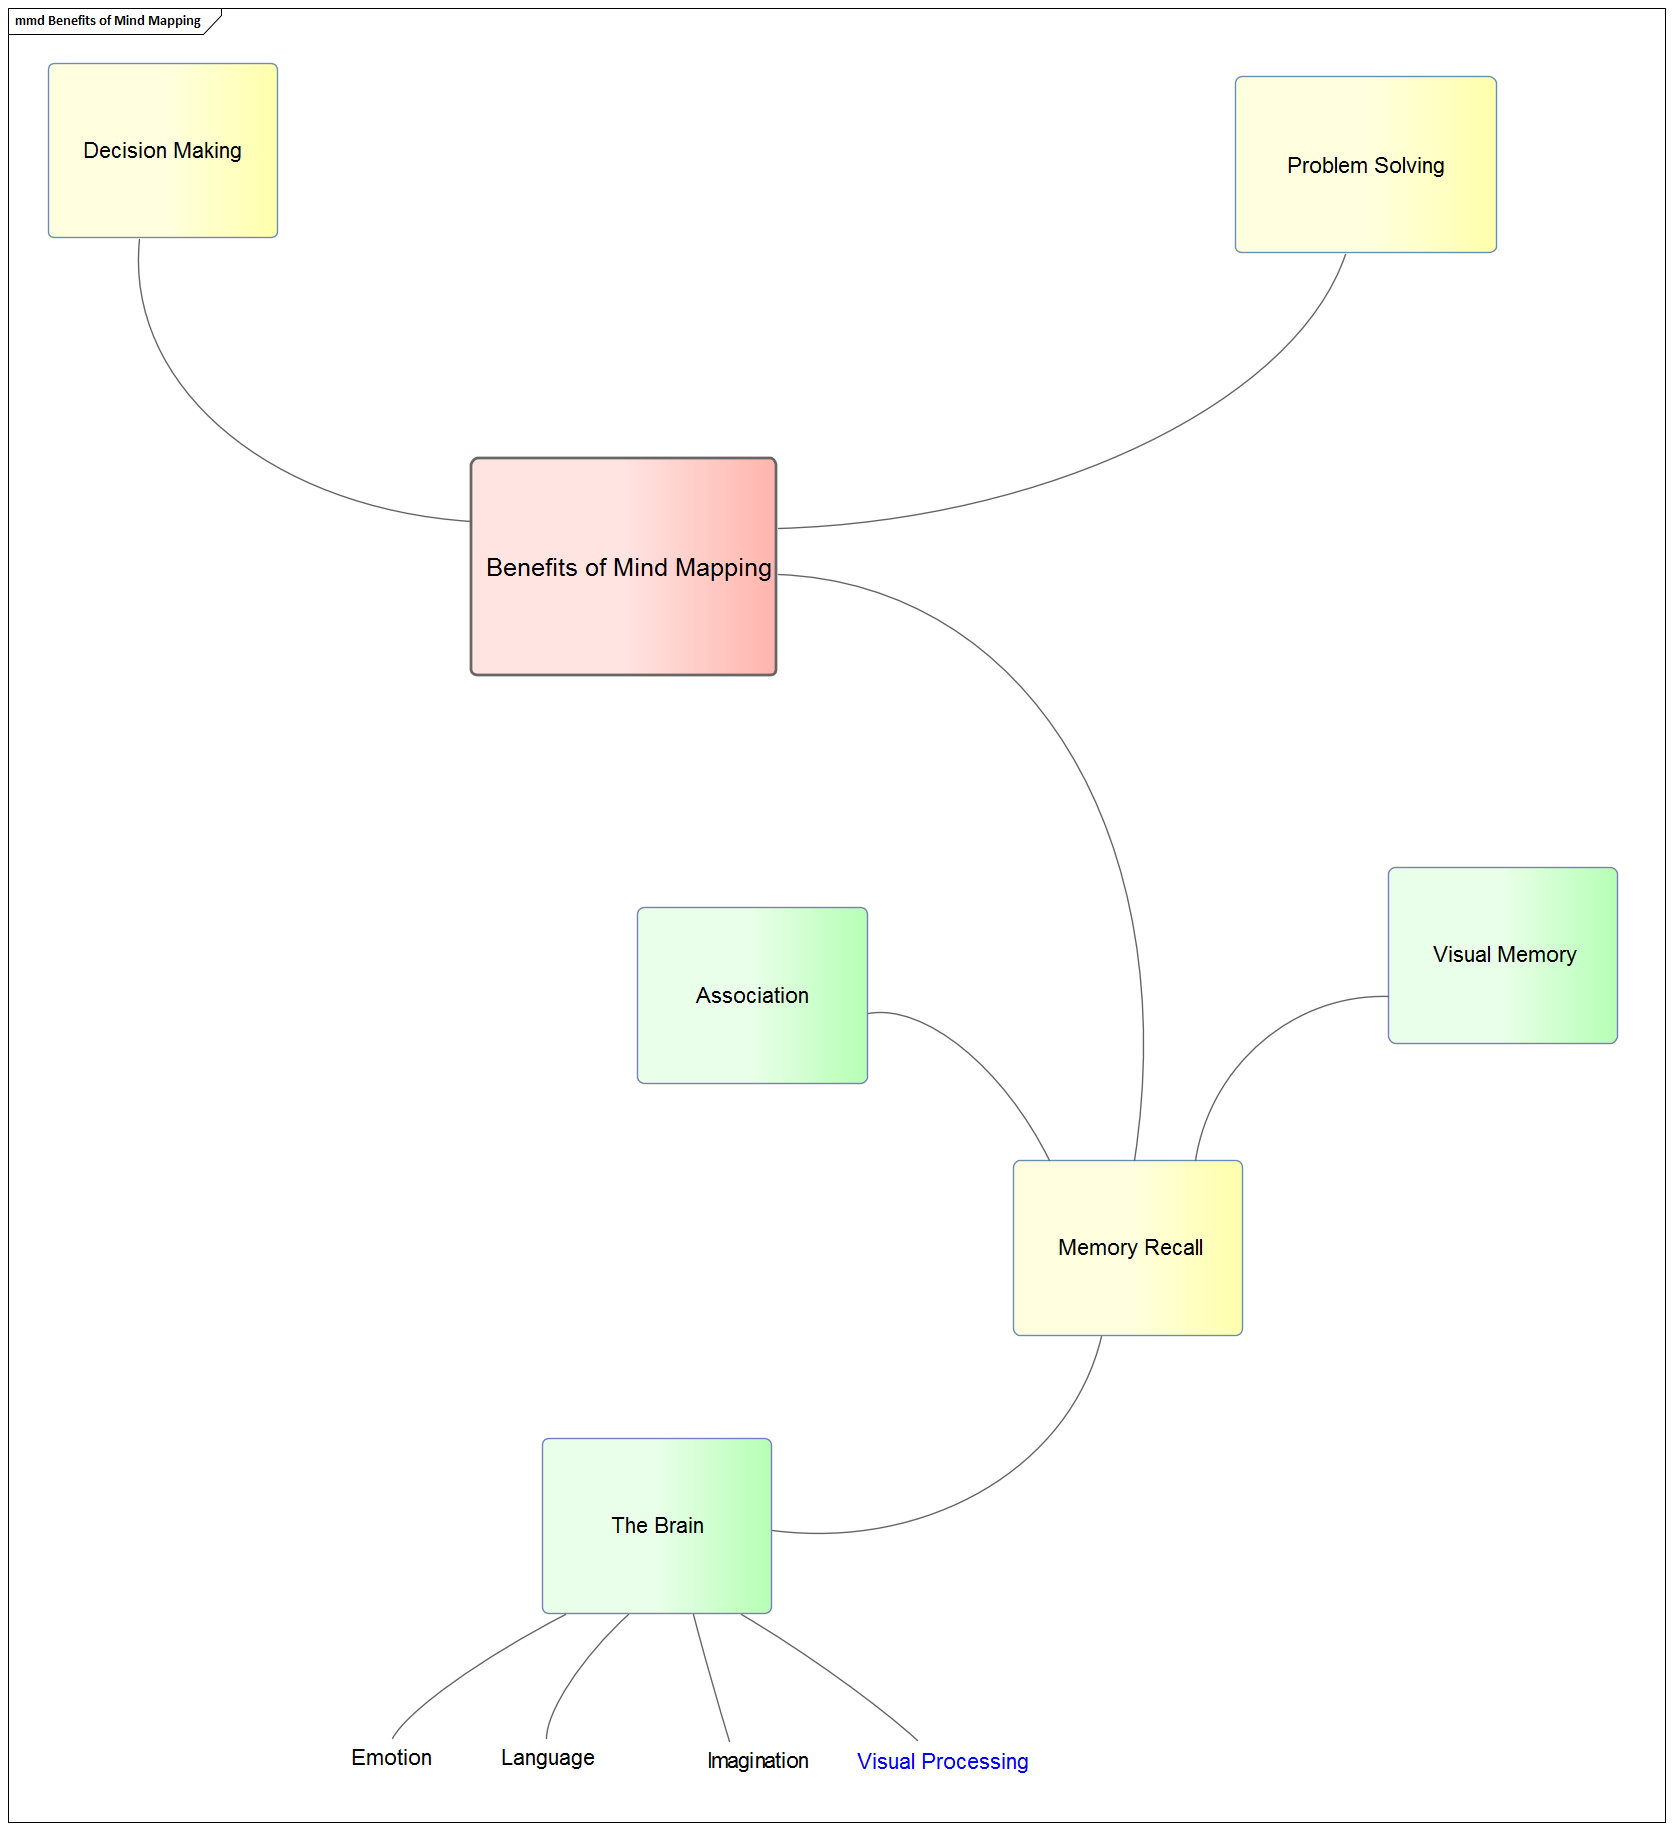 Example of simple Mind Mapping diagram in Sparx Systems Enterprise Architect.